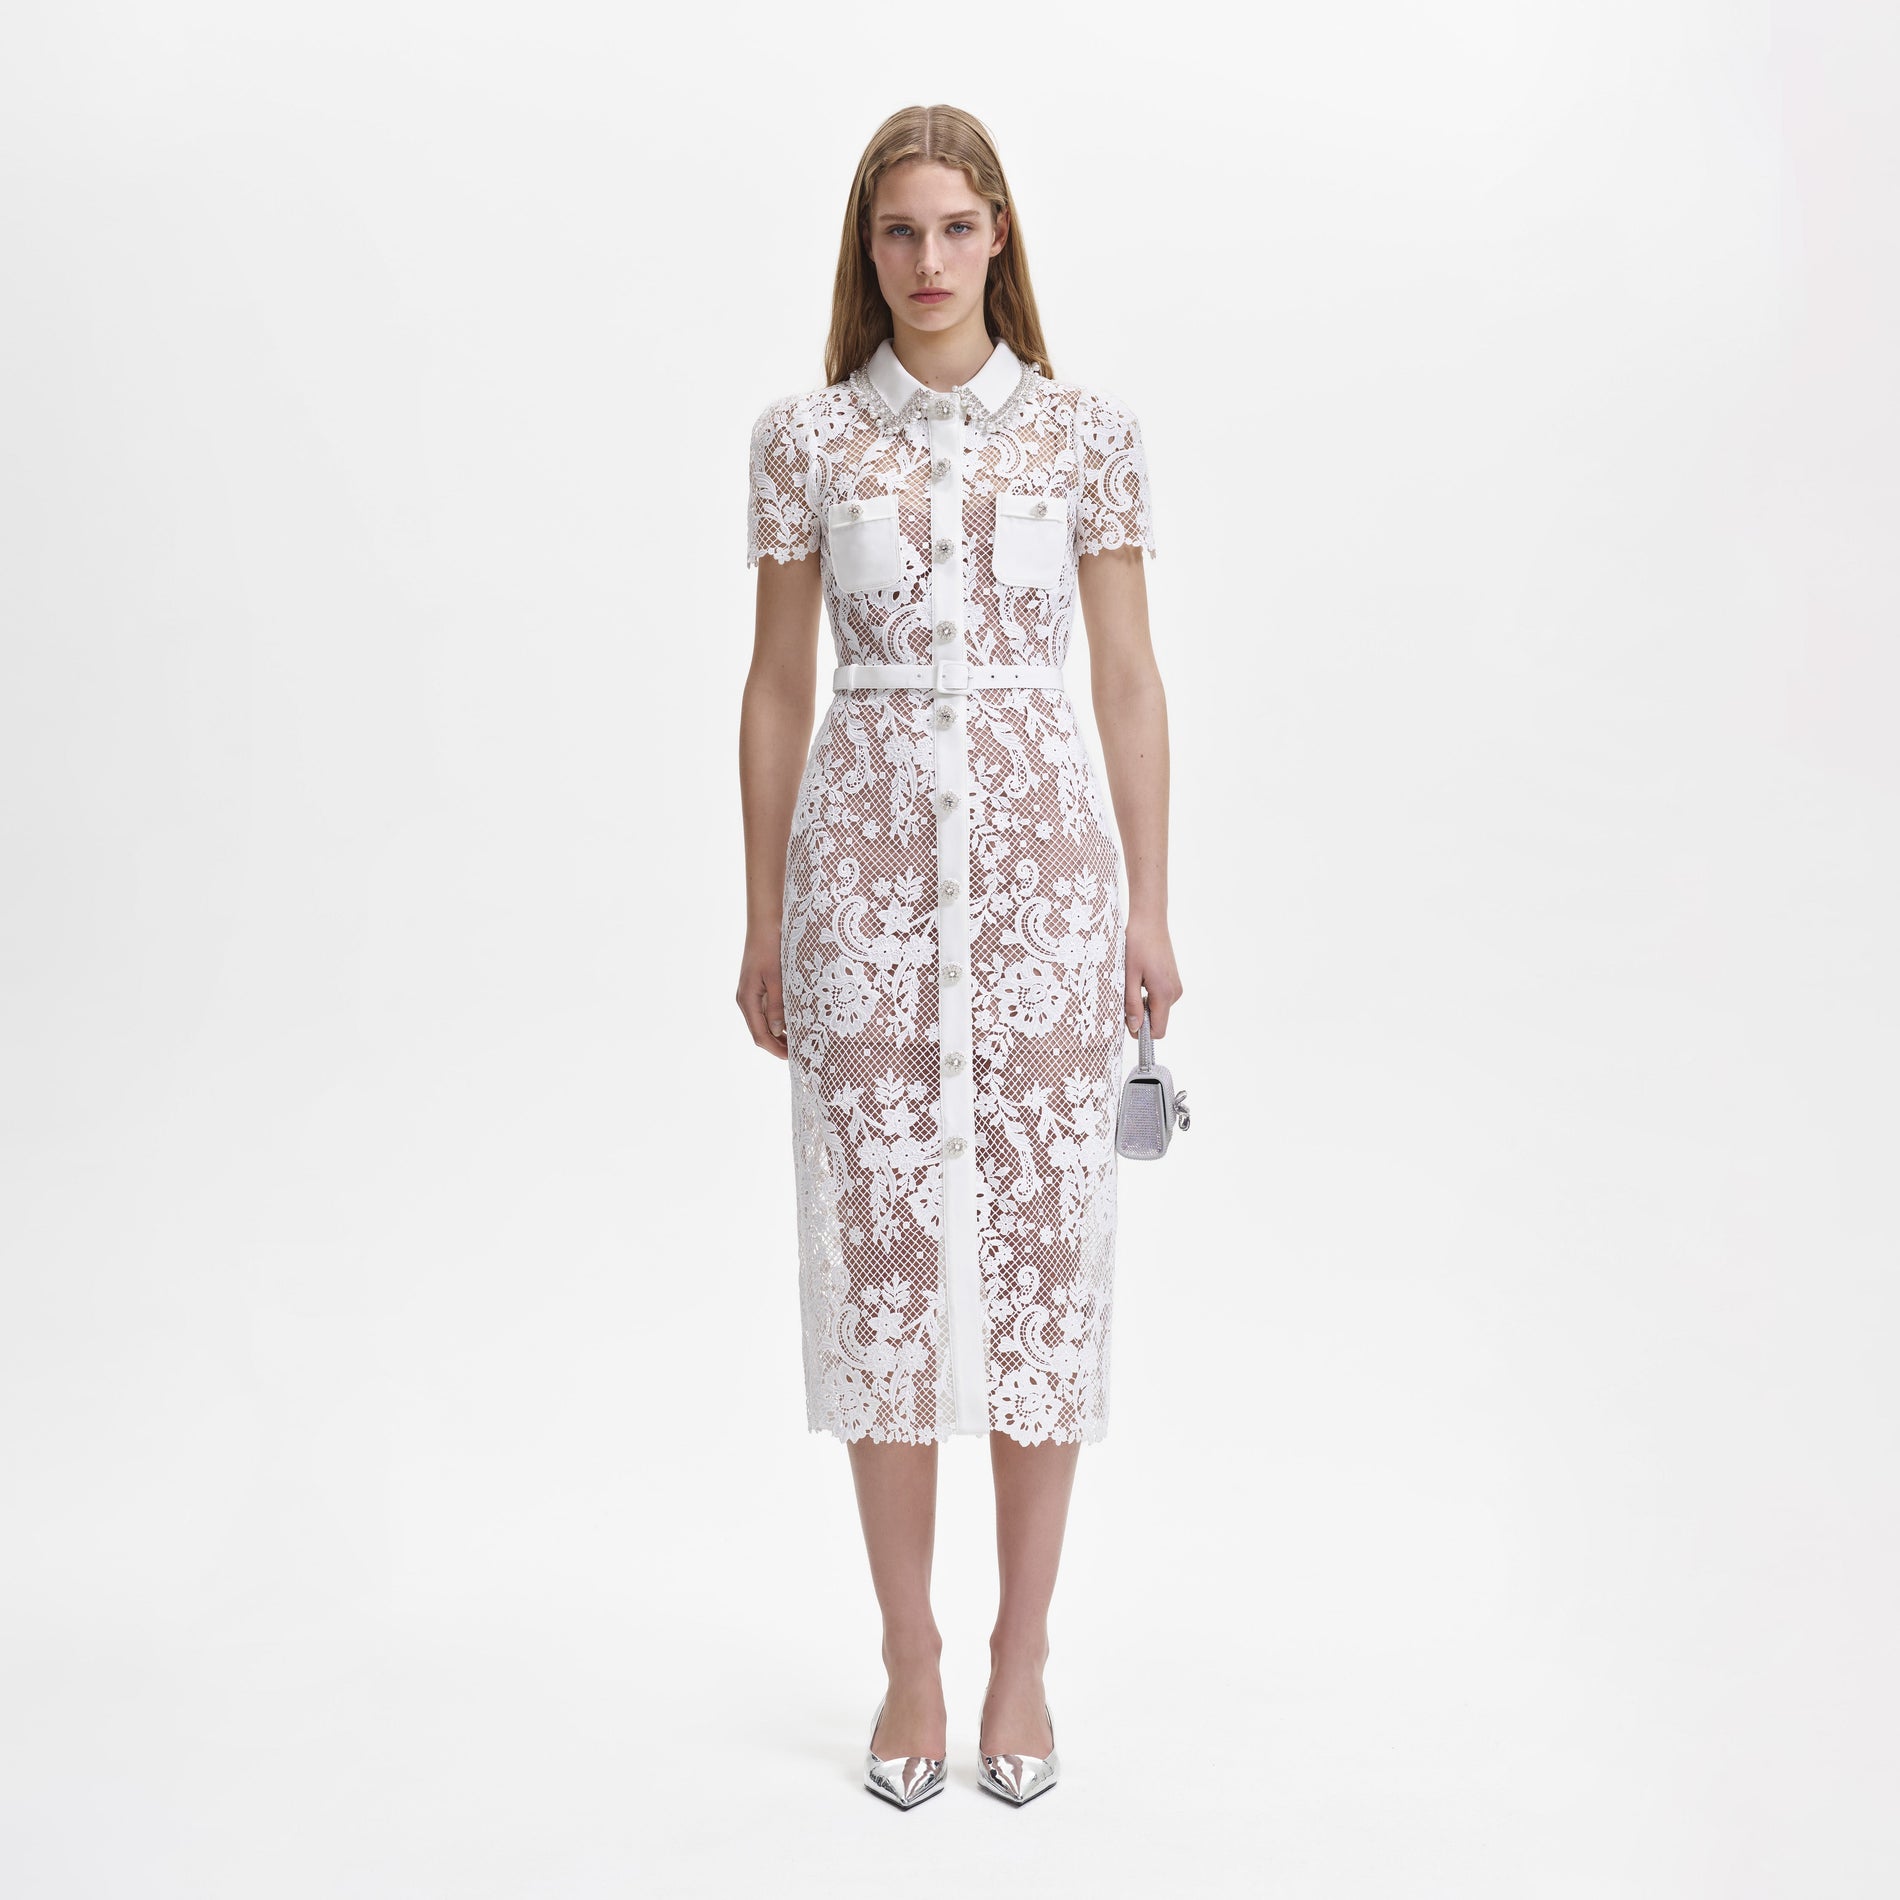 A woman wearing the White Lace Button Front Midi Dress